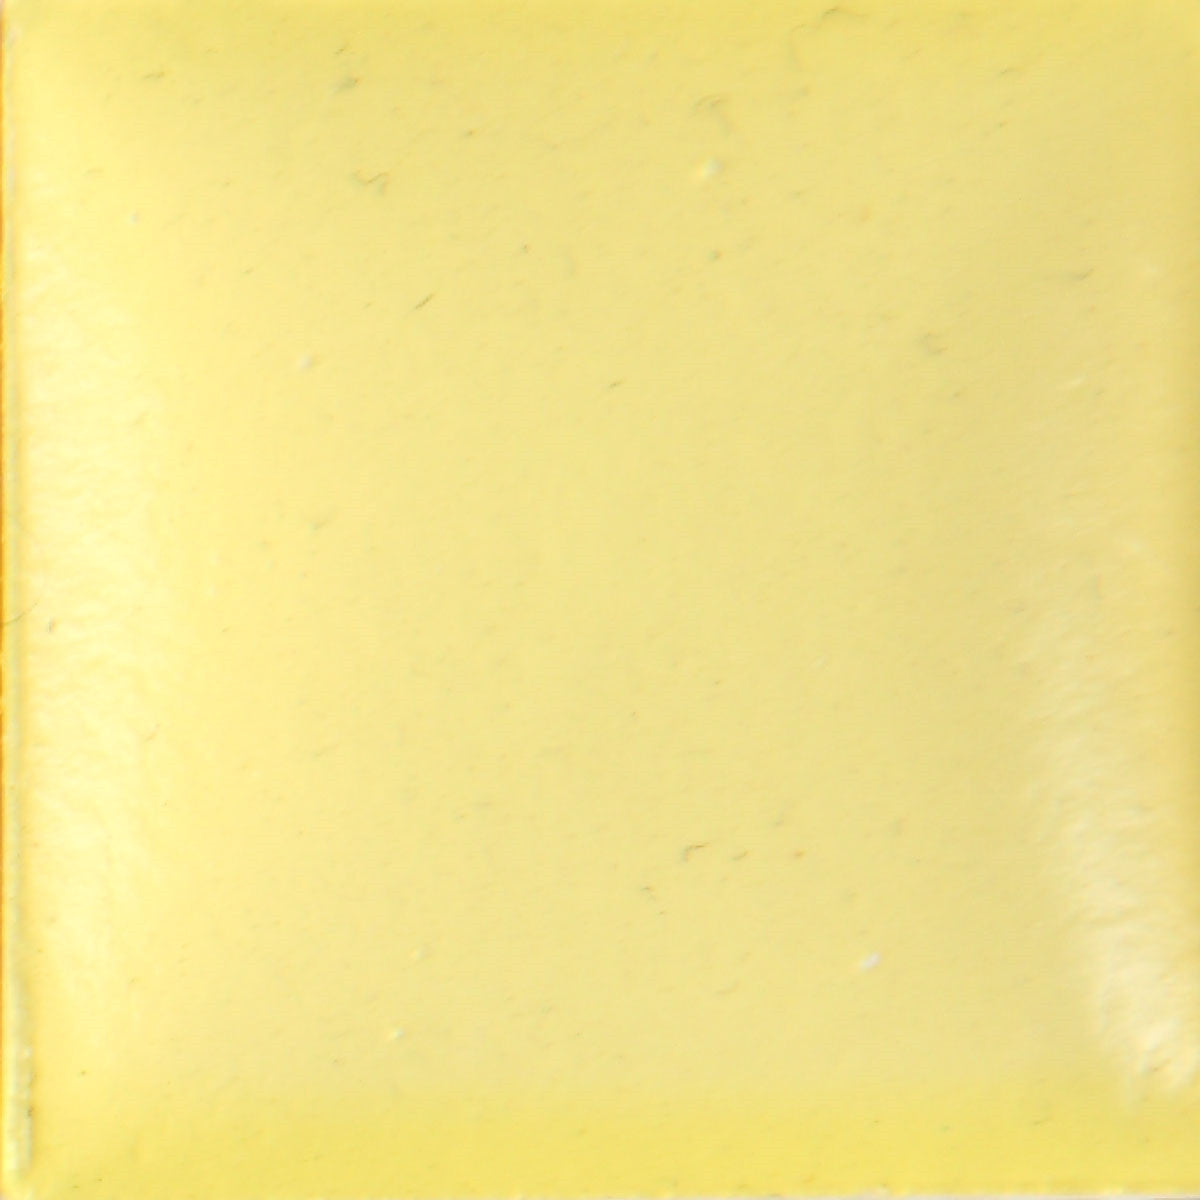 Duncan OS433 Pale Yellow Opaque Bisq-Stain, 2 oz